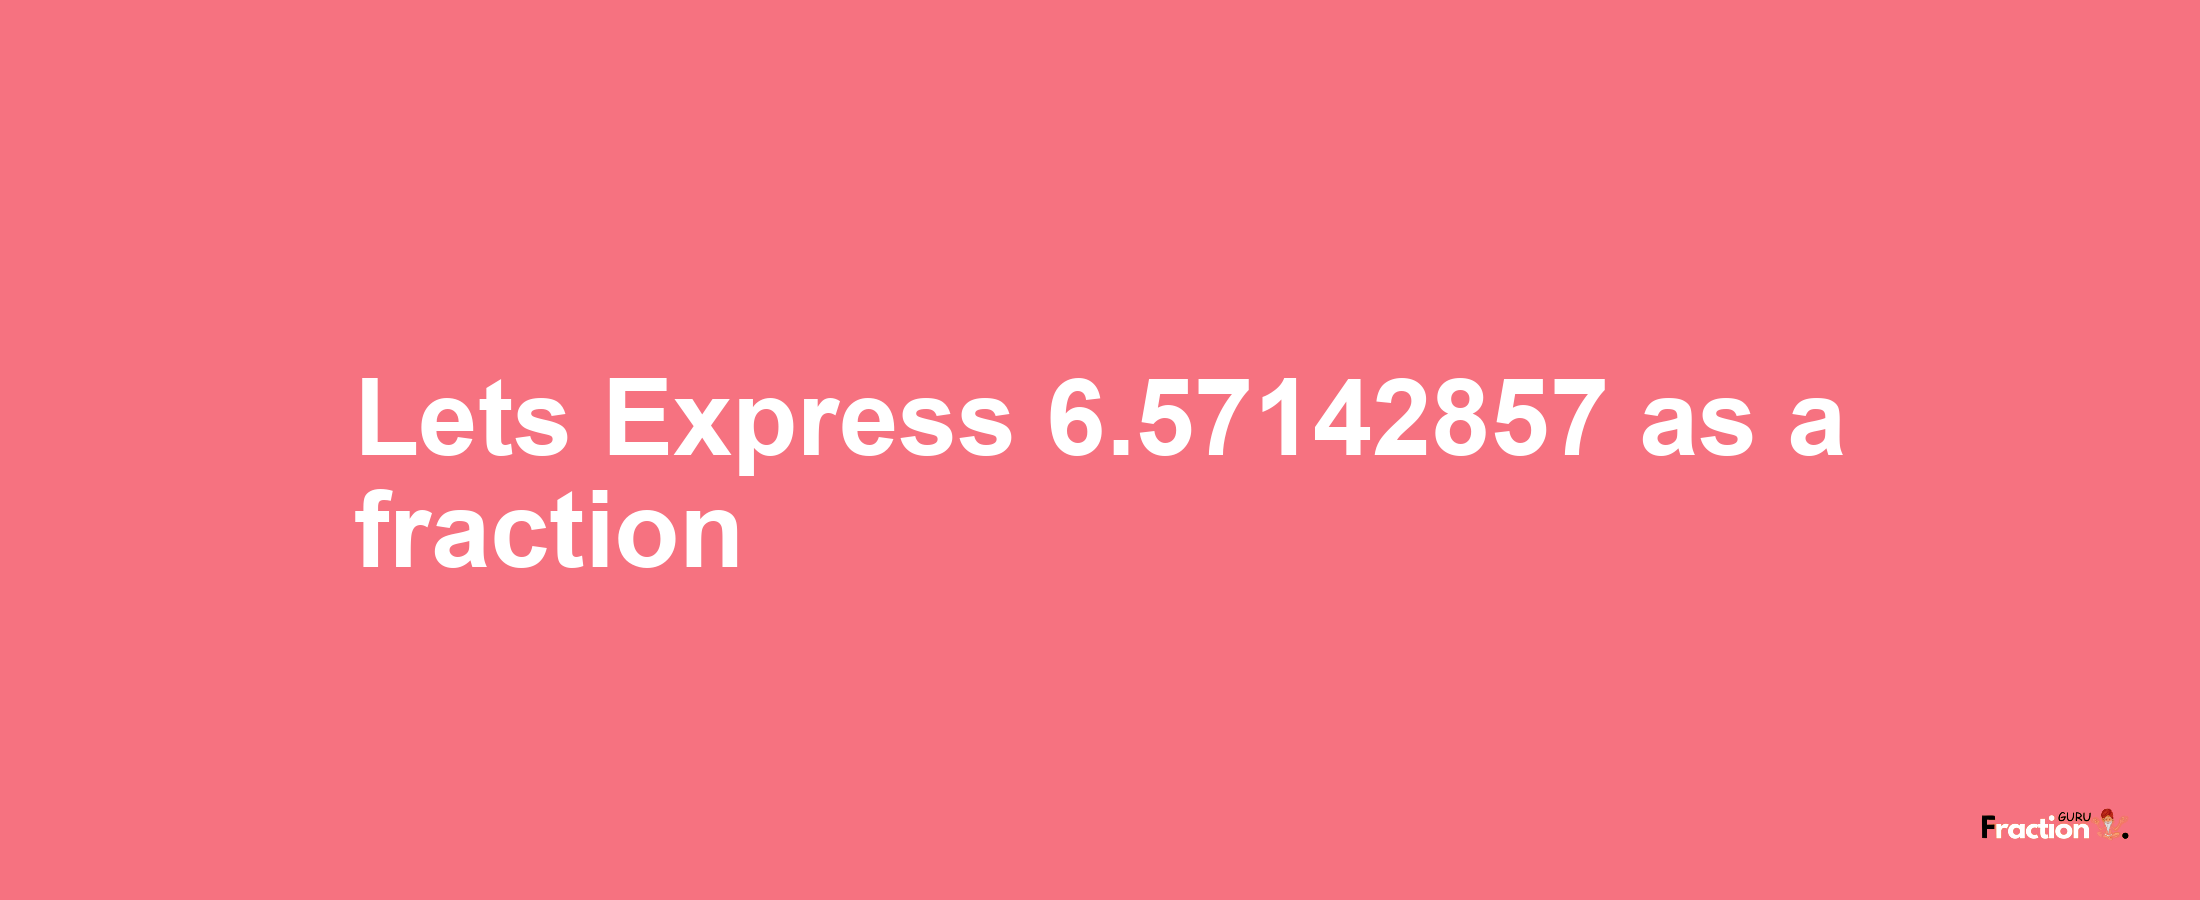 Lets Express 6.57142857 as afraction